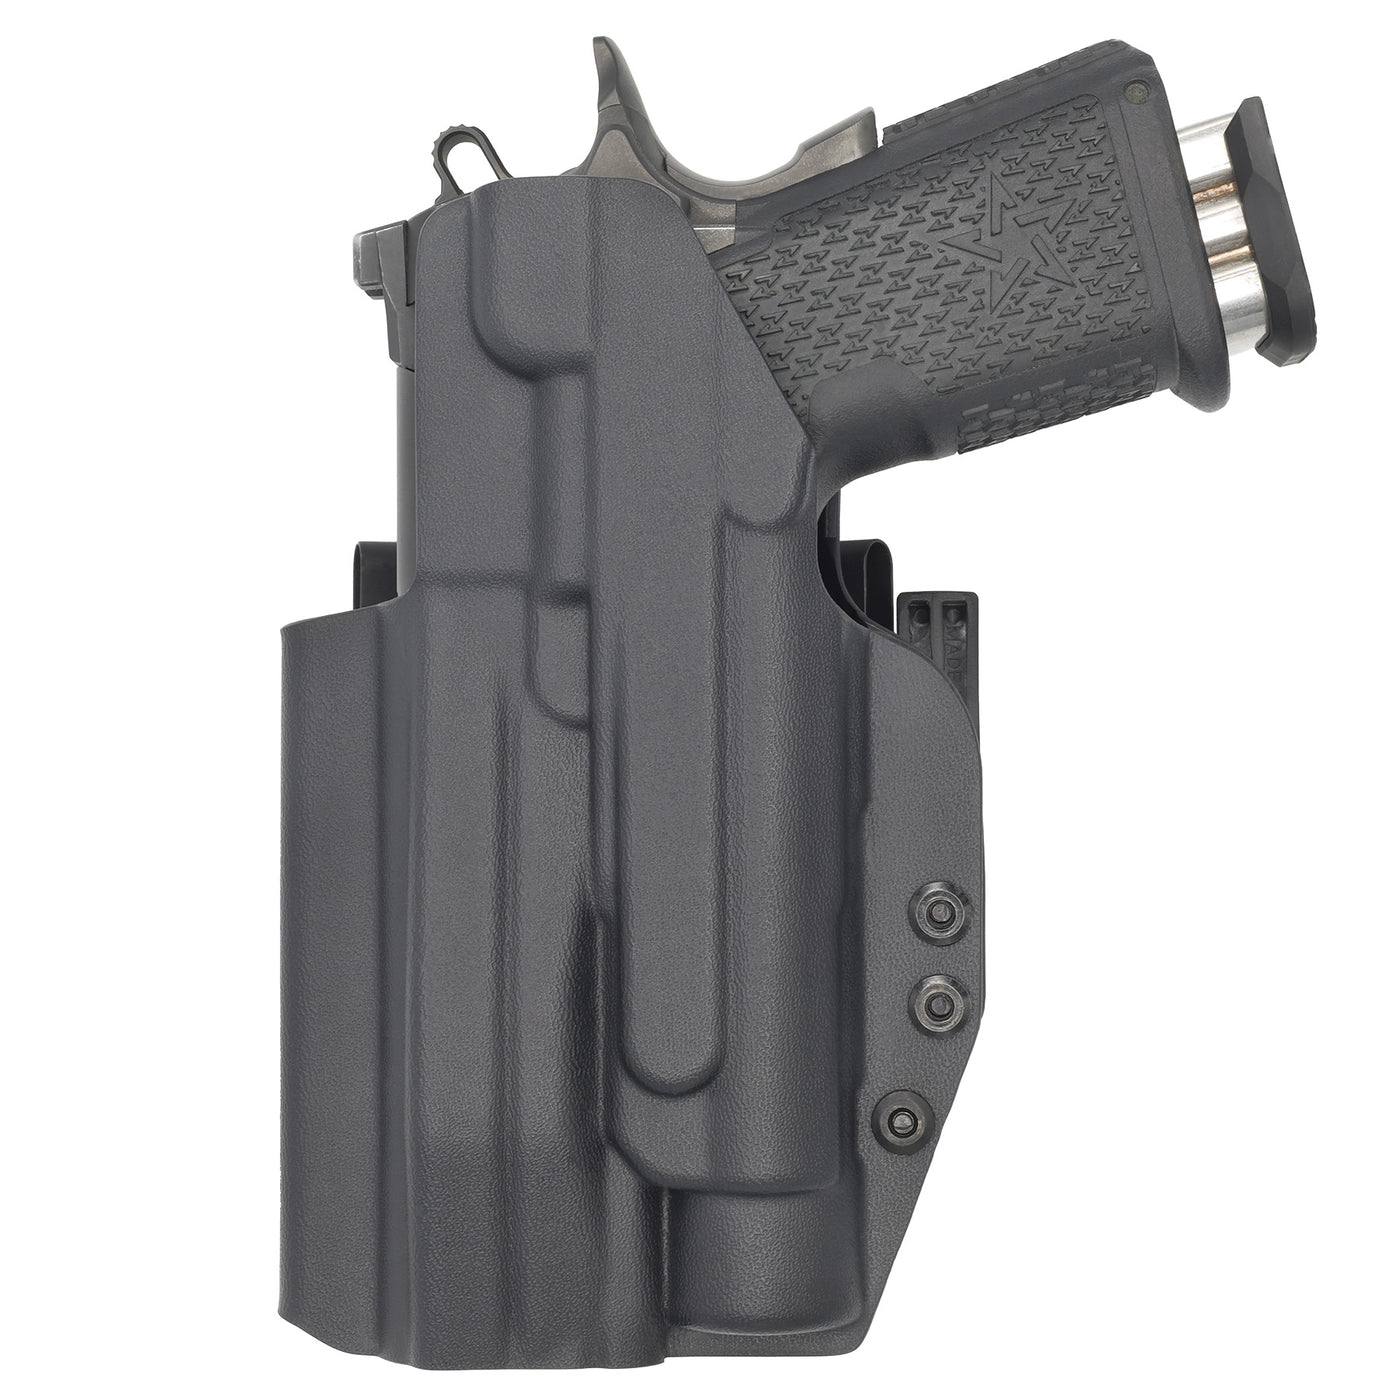 C&G holsters Quickship IWB ALPHA UPGRADE tactical 1911/2011 Streamlight TLR-1 in holstered position back view